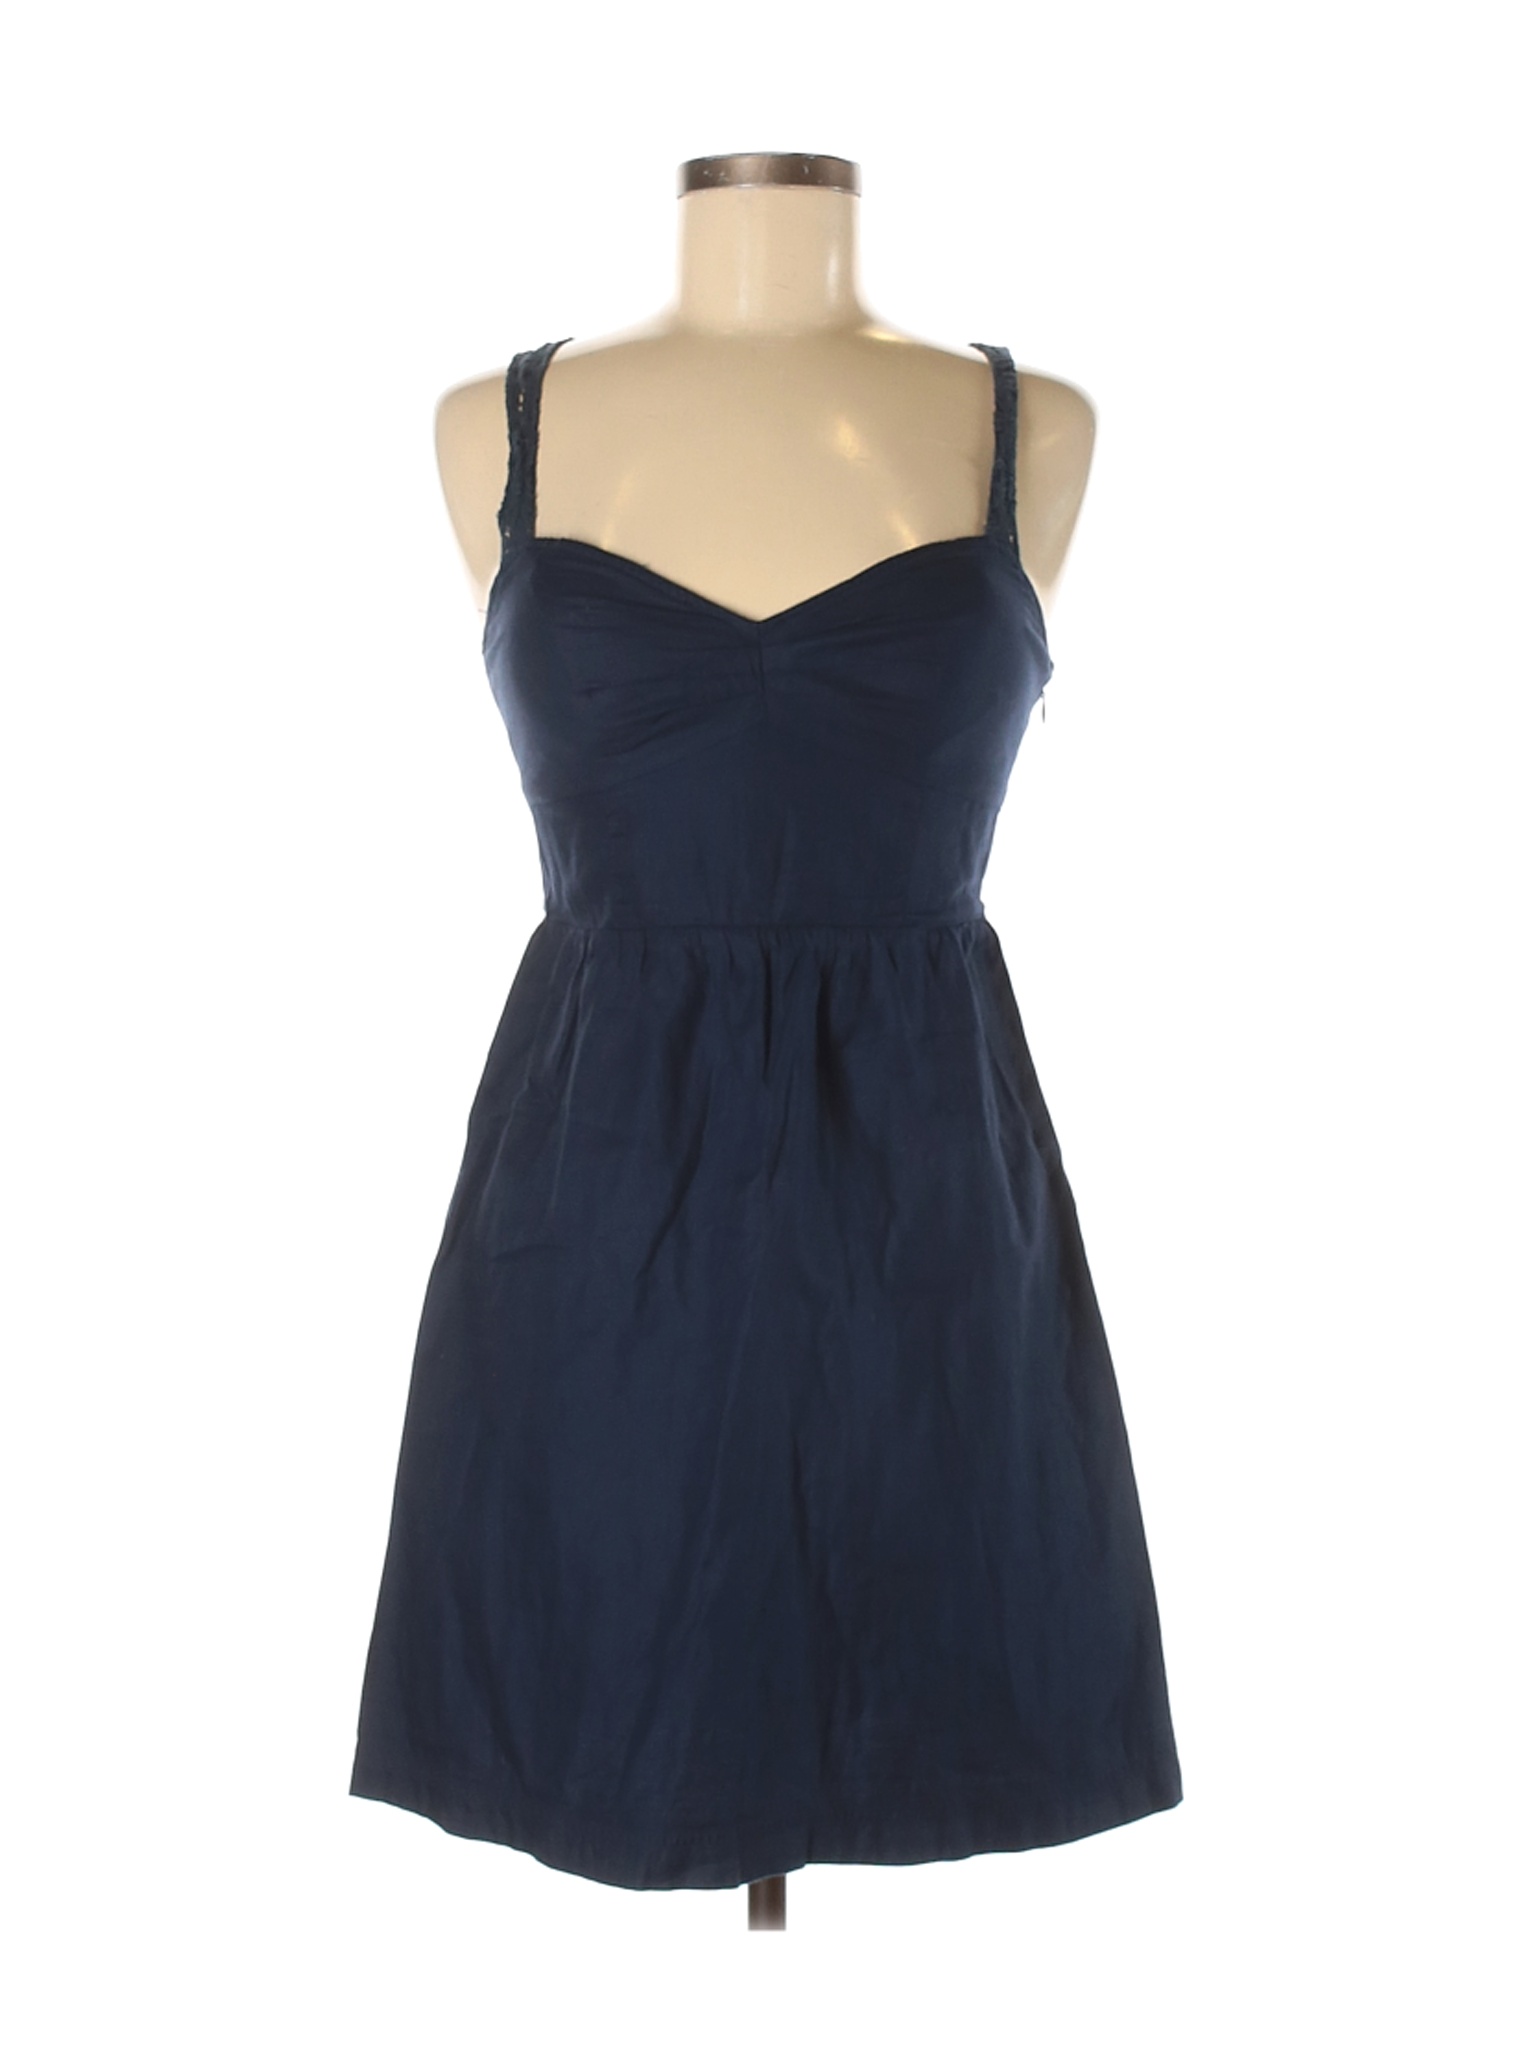 American Eagle Outfitters Women Blue Casual Dress S | eBay